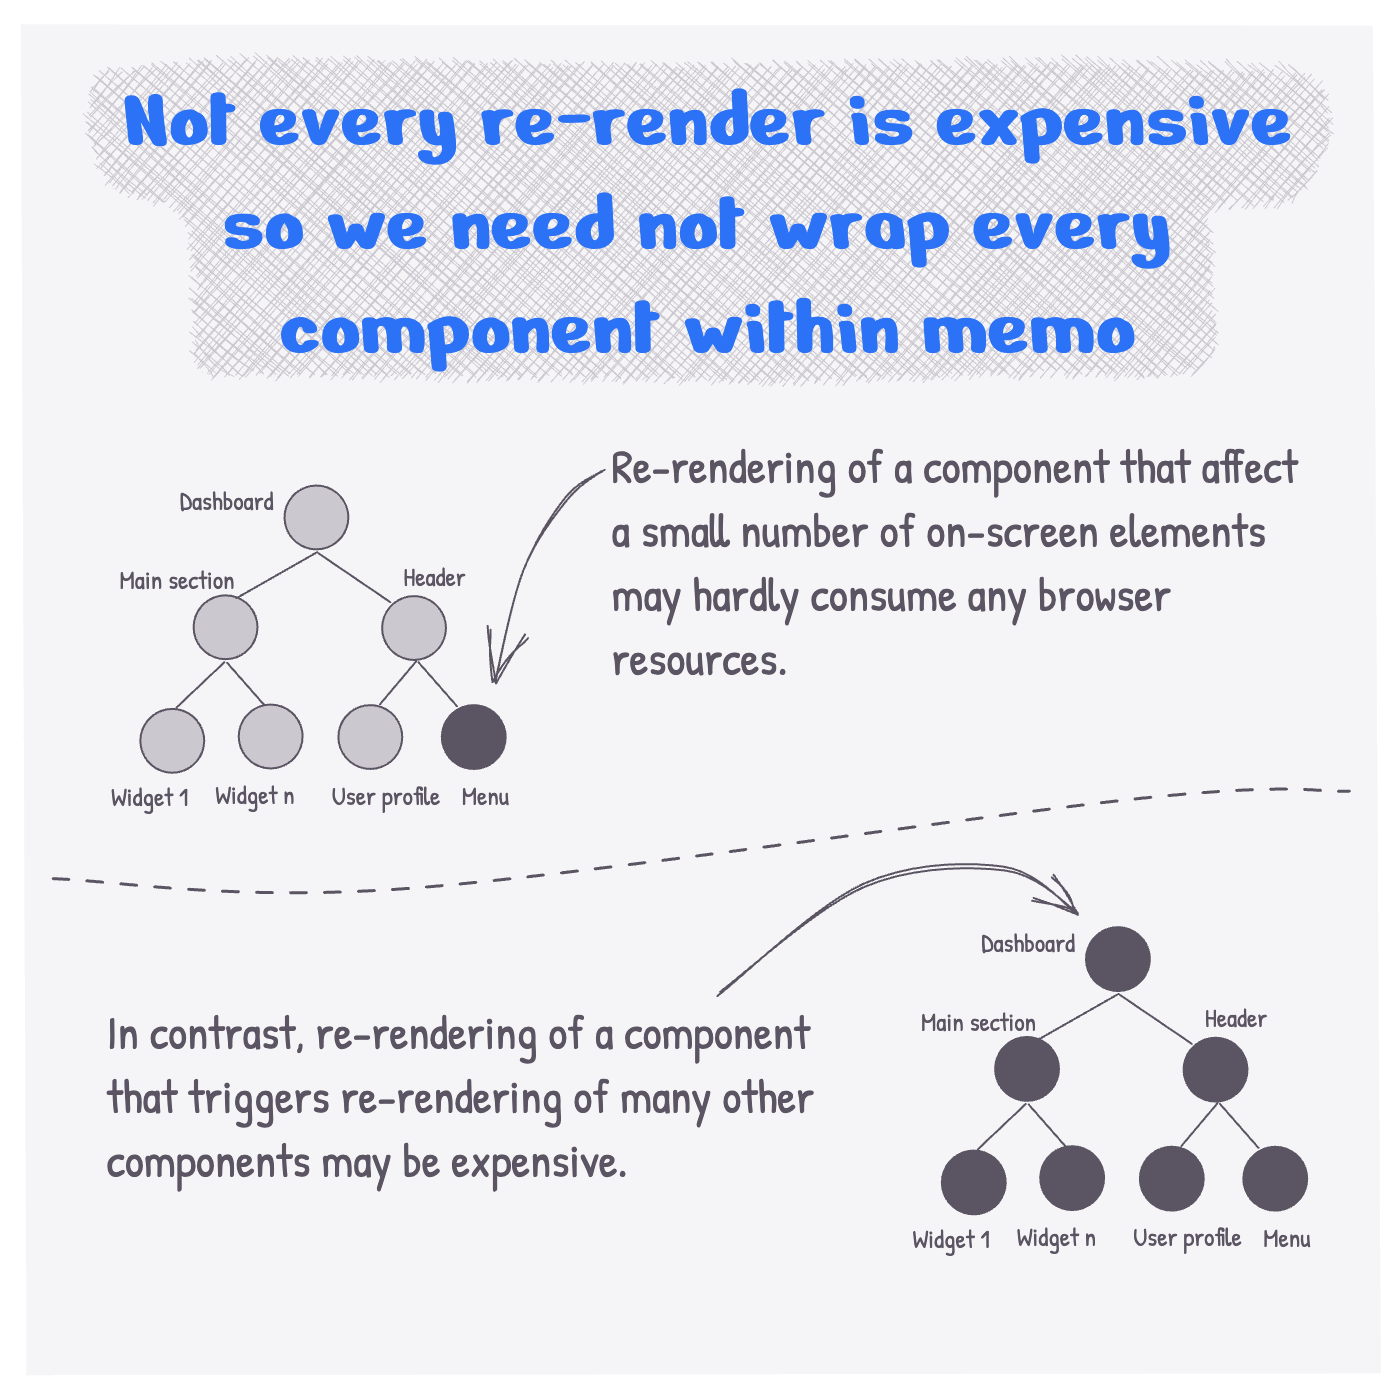 Not every re-render is expensive, so we need not wrap every component within useMemo. Re-rendering of a component that affects a small number of on-screen elements may hardly consume any browser resources. In contrast, re-rendering of a component that triggers re-rendering of many other components may be expensive.